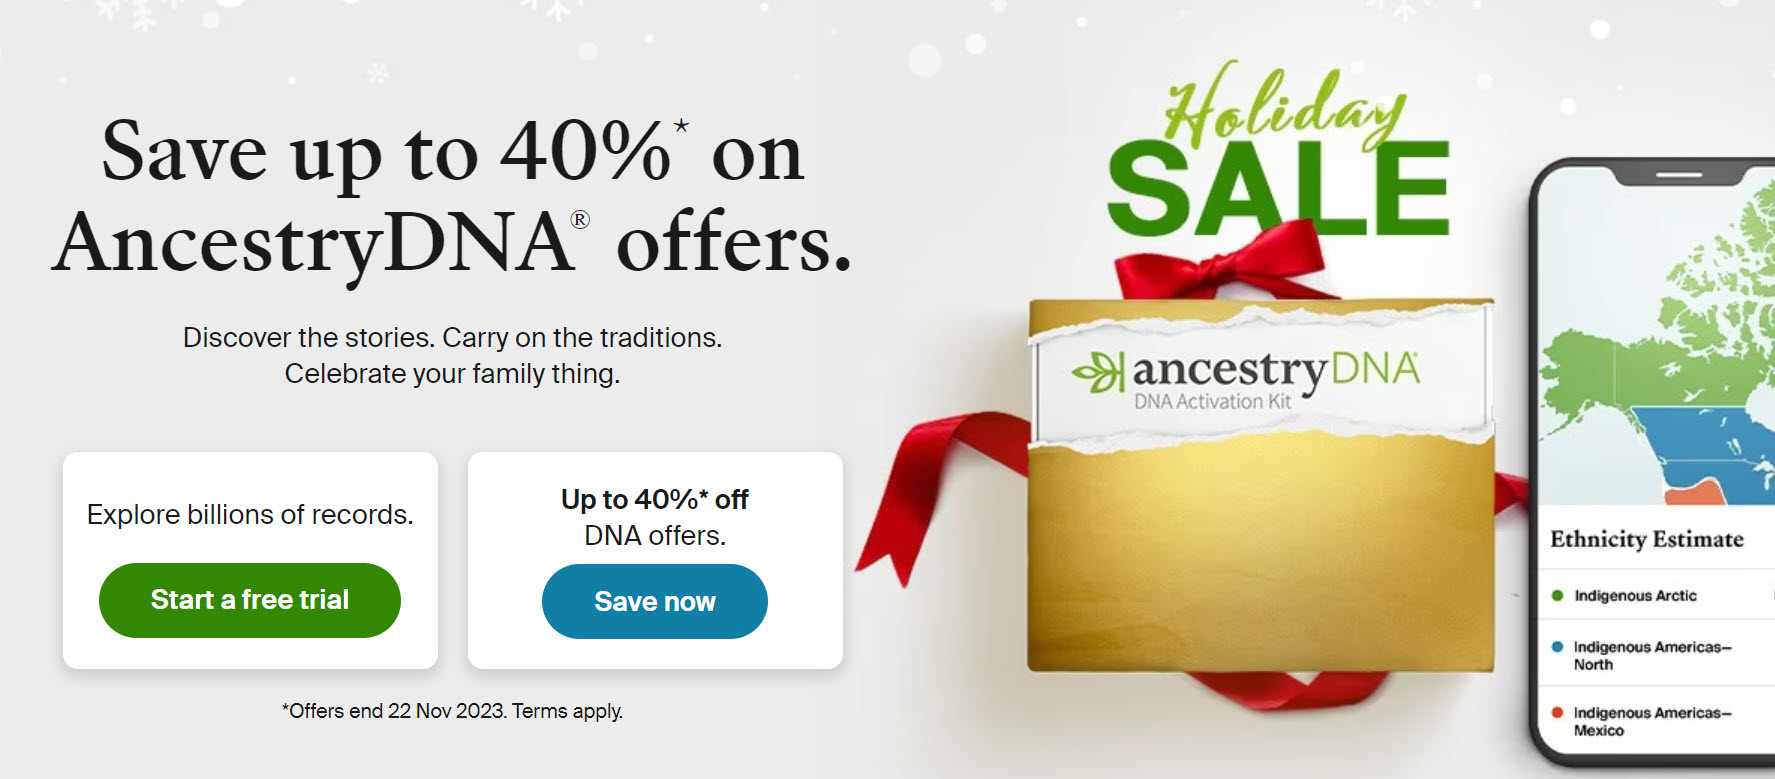 AncestryDNA Holiday Sale 2023 - A Great Family Gift!